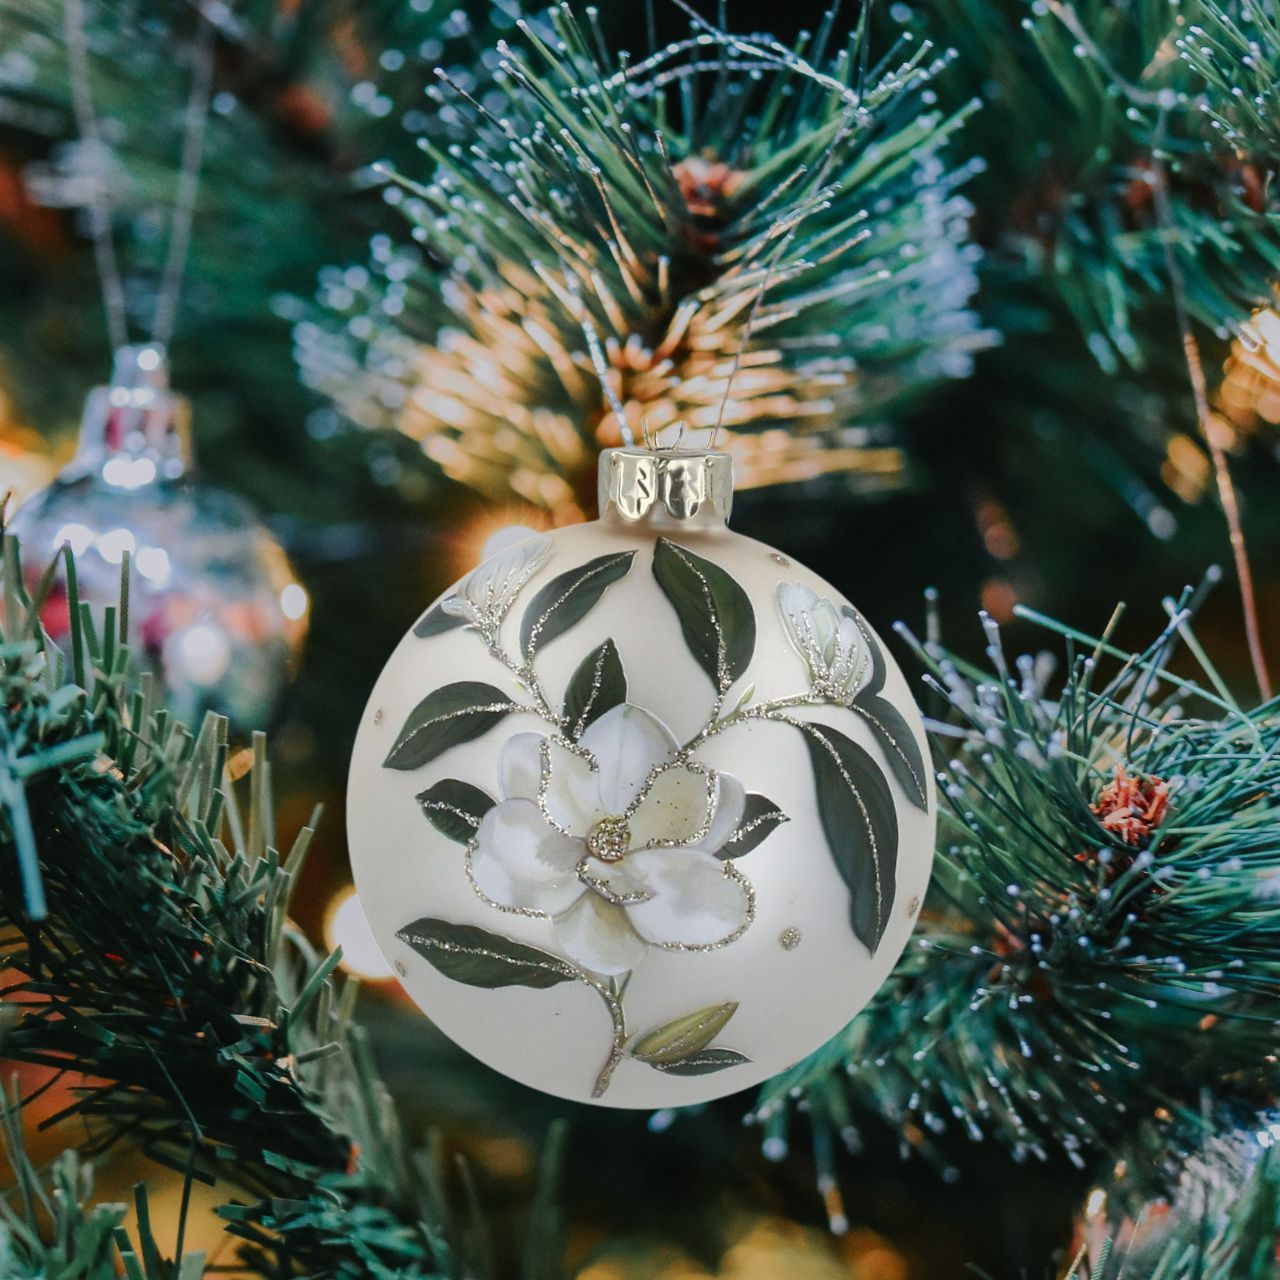 Gisela Graham Matt Cream Magnolia Glass Christmas Bauble  This Gisela Graham Matt Cream Magnolia Glass Christmas Bauble is perfect for decorating your tree this holiday season. Its smooth matt cream finish gives the perfect wintery touch and the intricate magnolia design adds a hint of nature for a truly unique look.